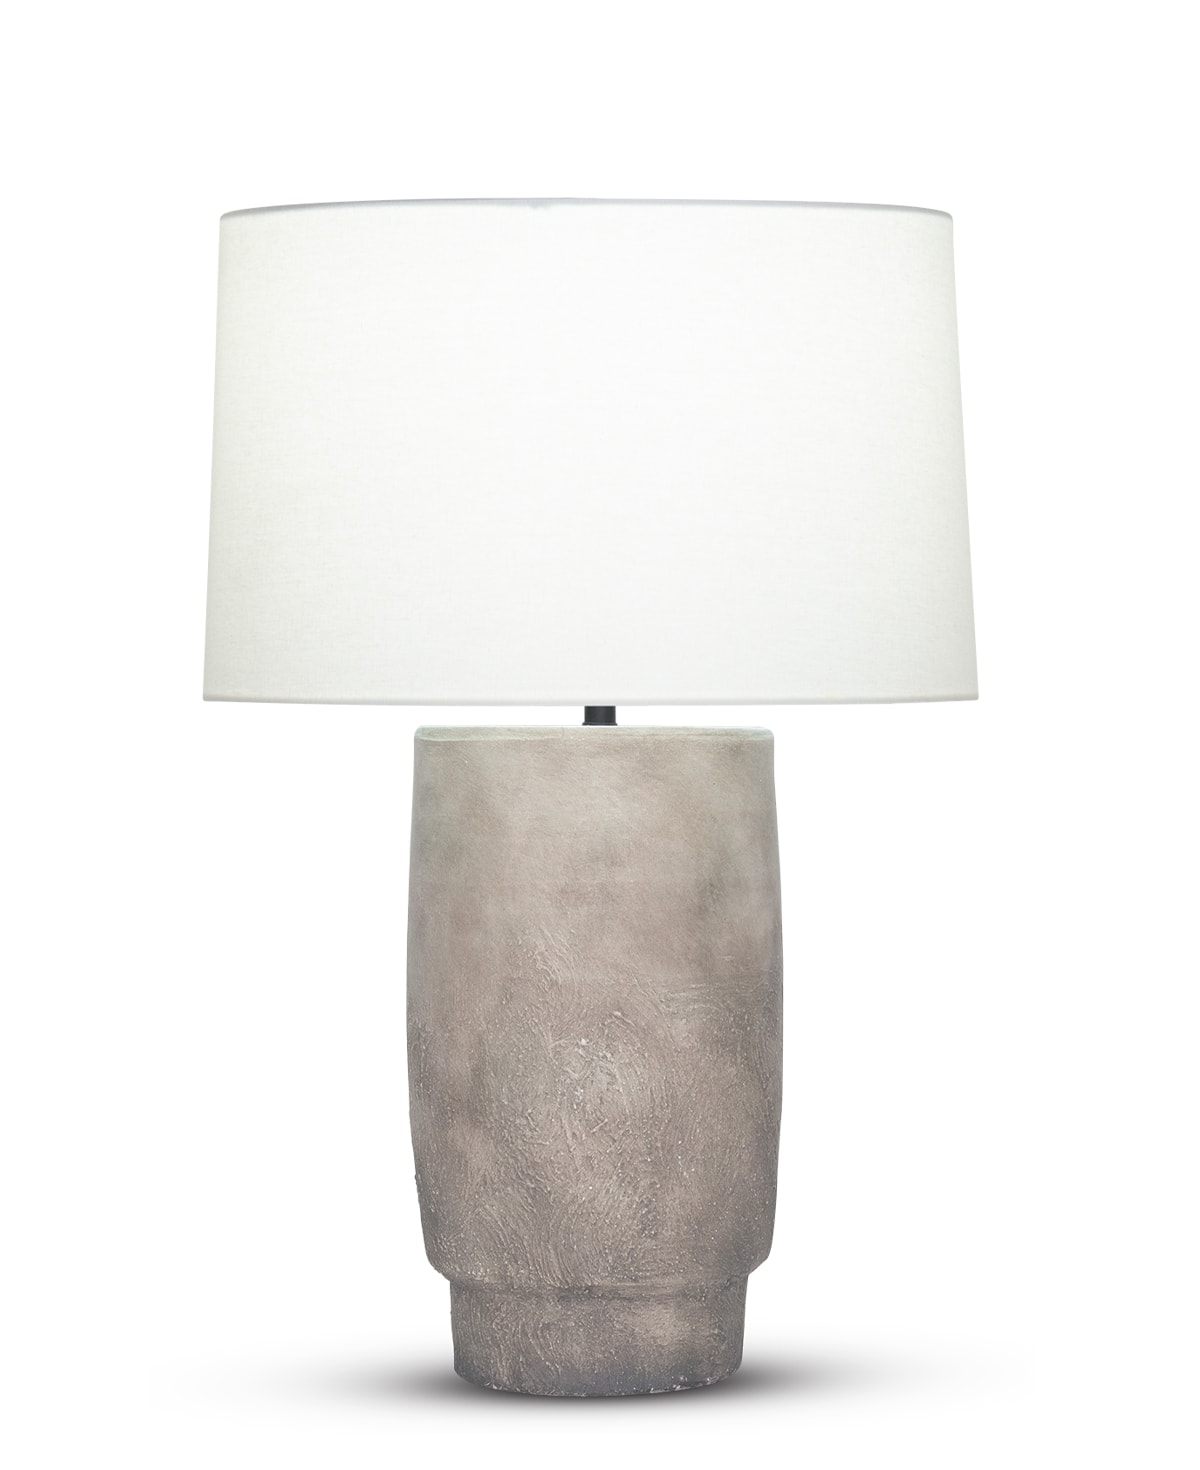 FlowDecor Dobbs Table Lamp in ceramic with earthy beige finish and off-white linen tapered drum shade (# 4543)